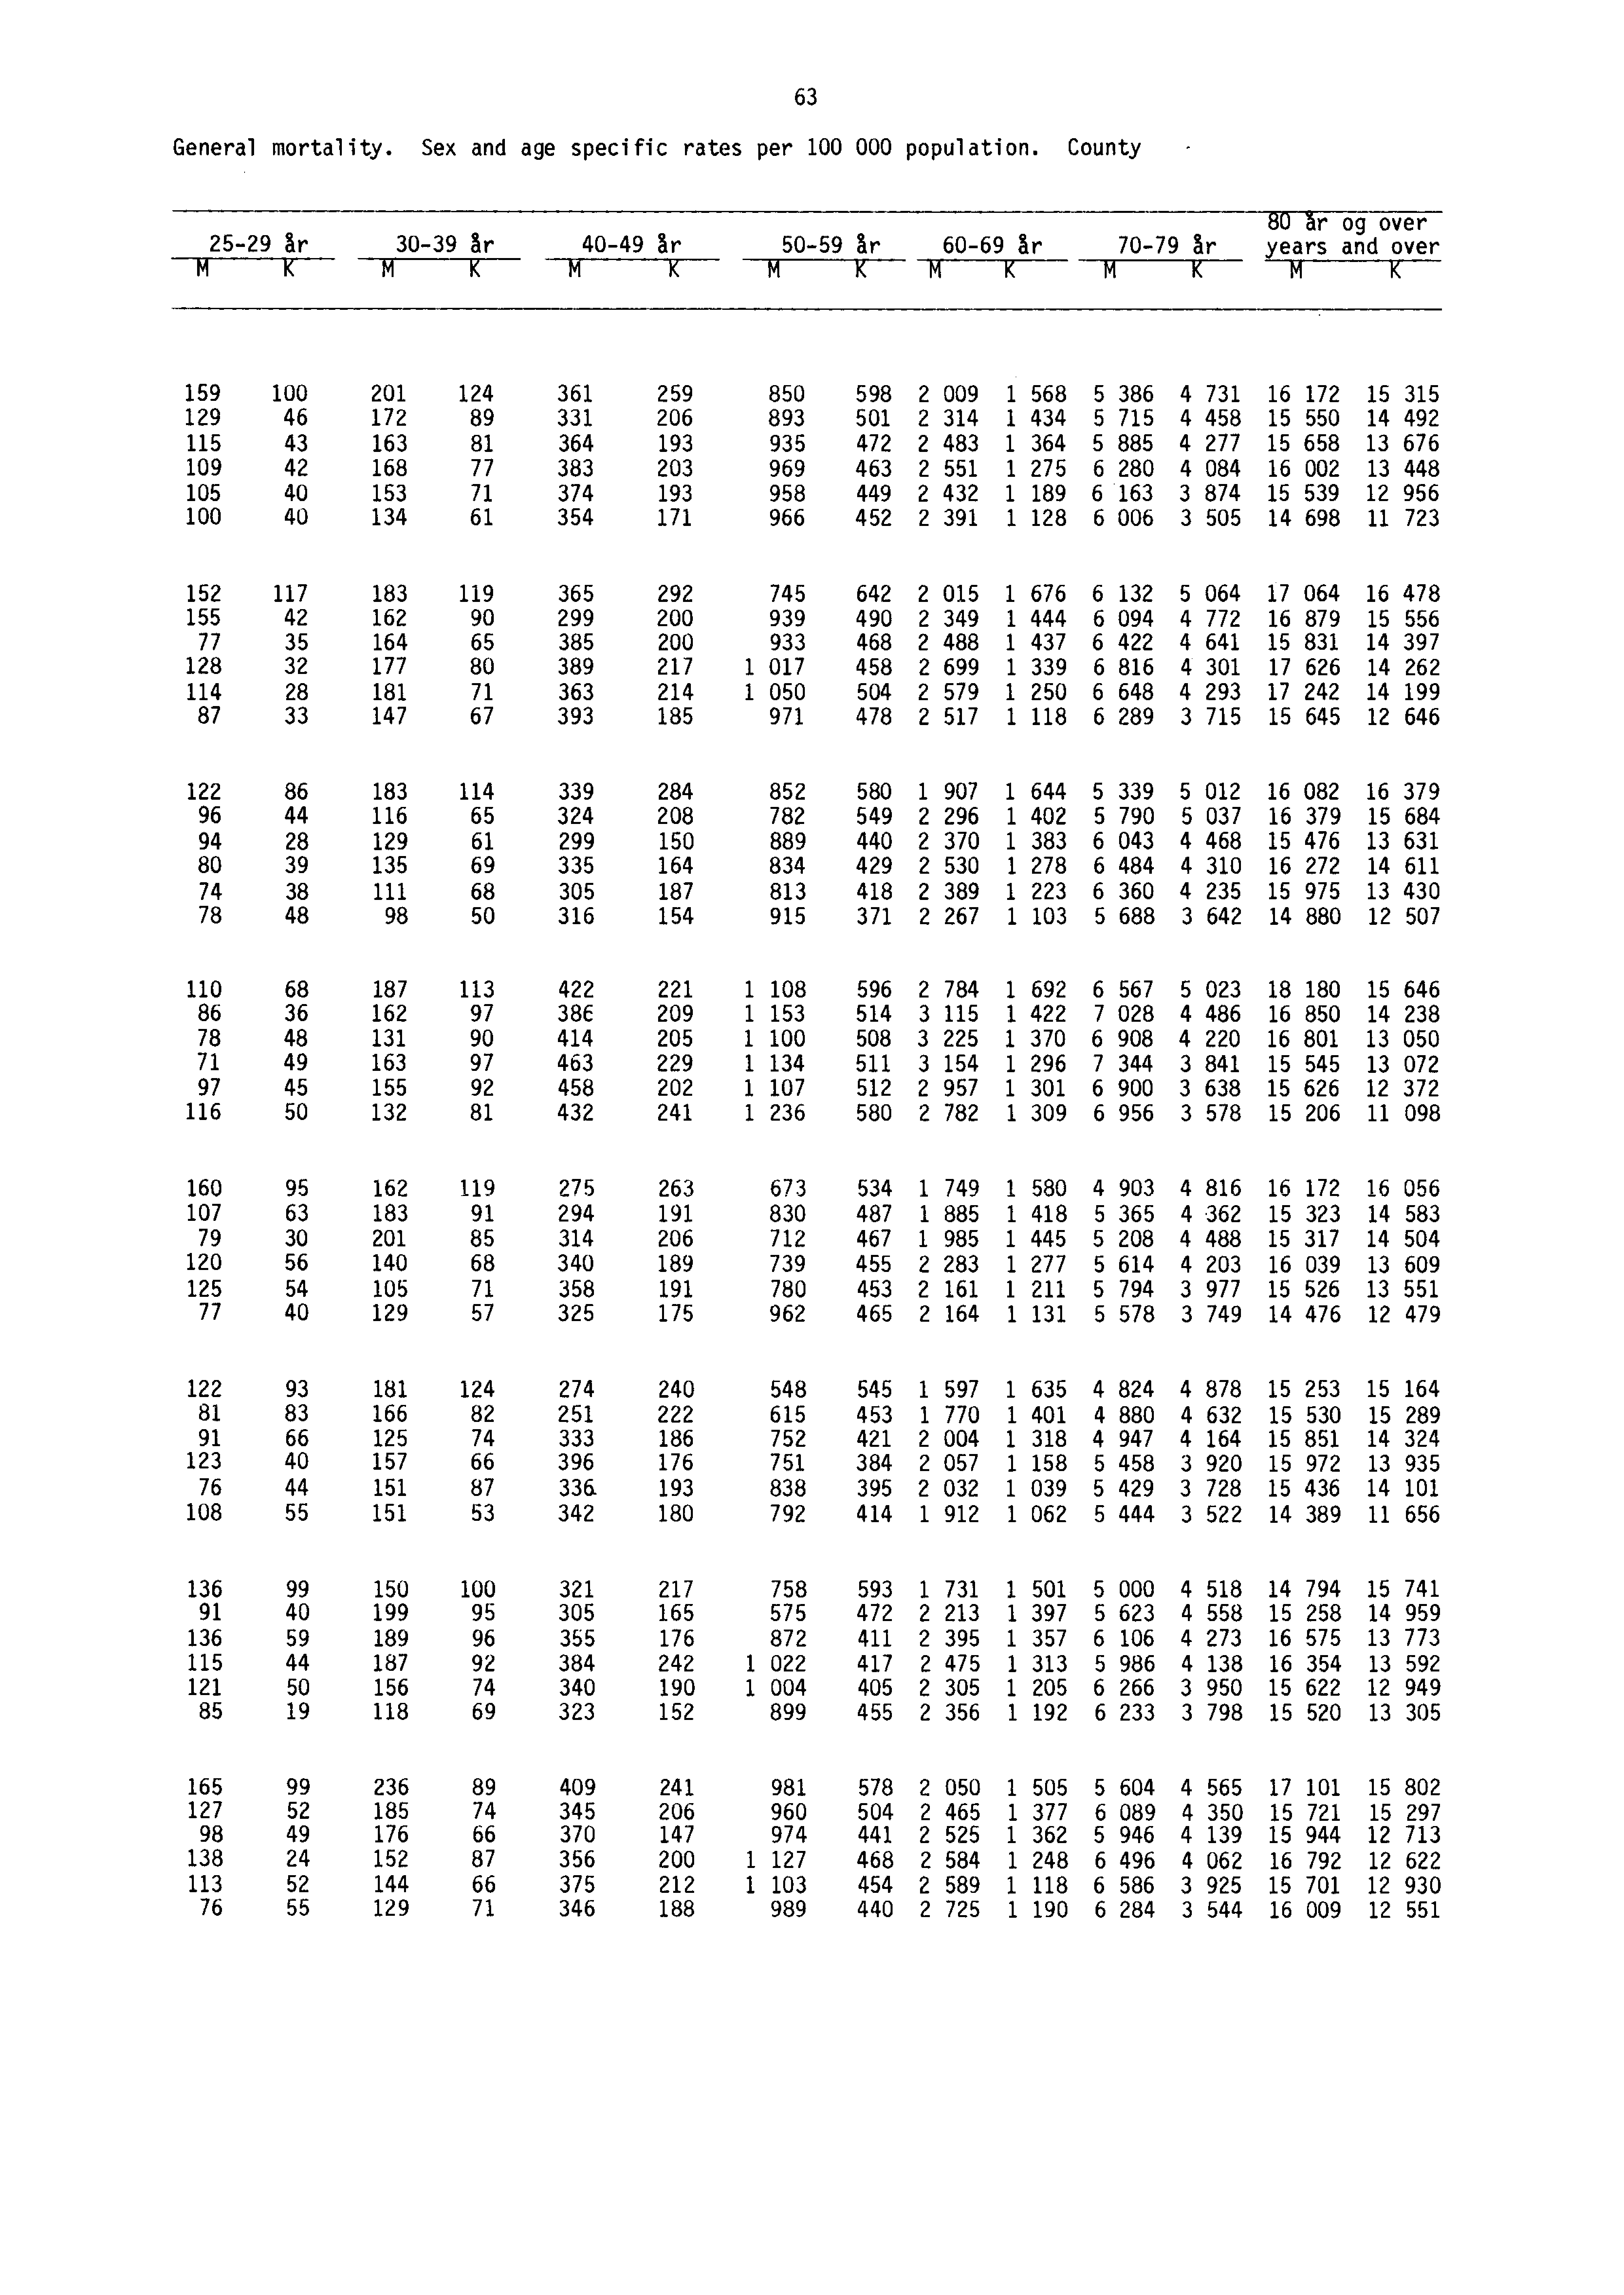 General mortality. Sex and age specific rates per 100 000 population.